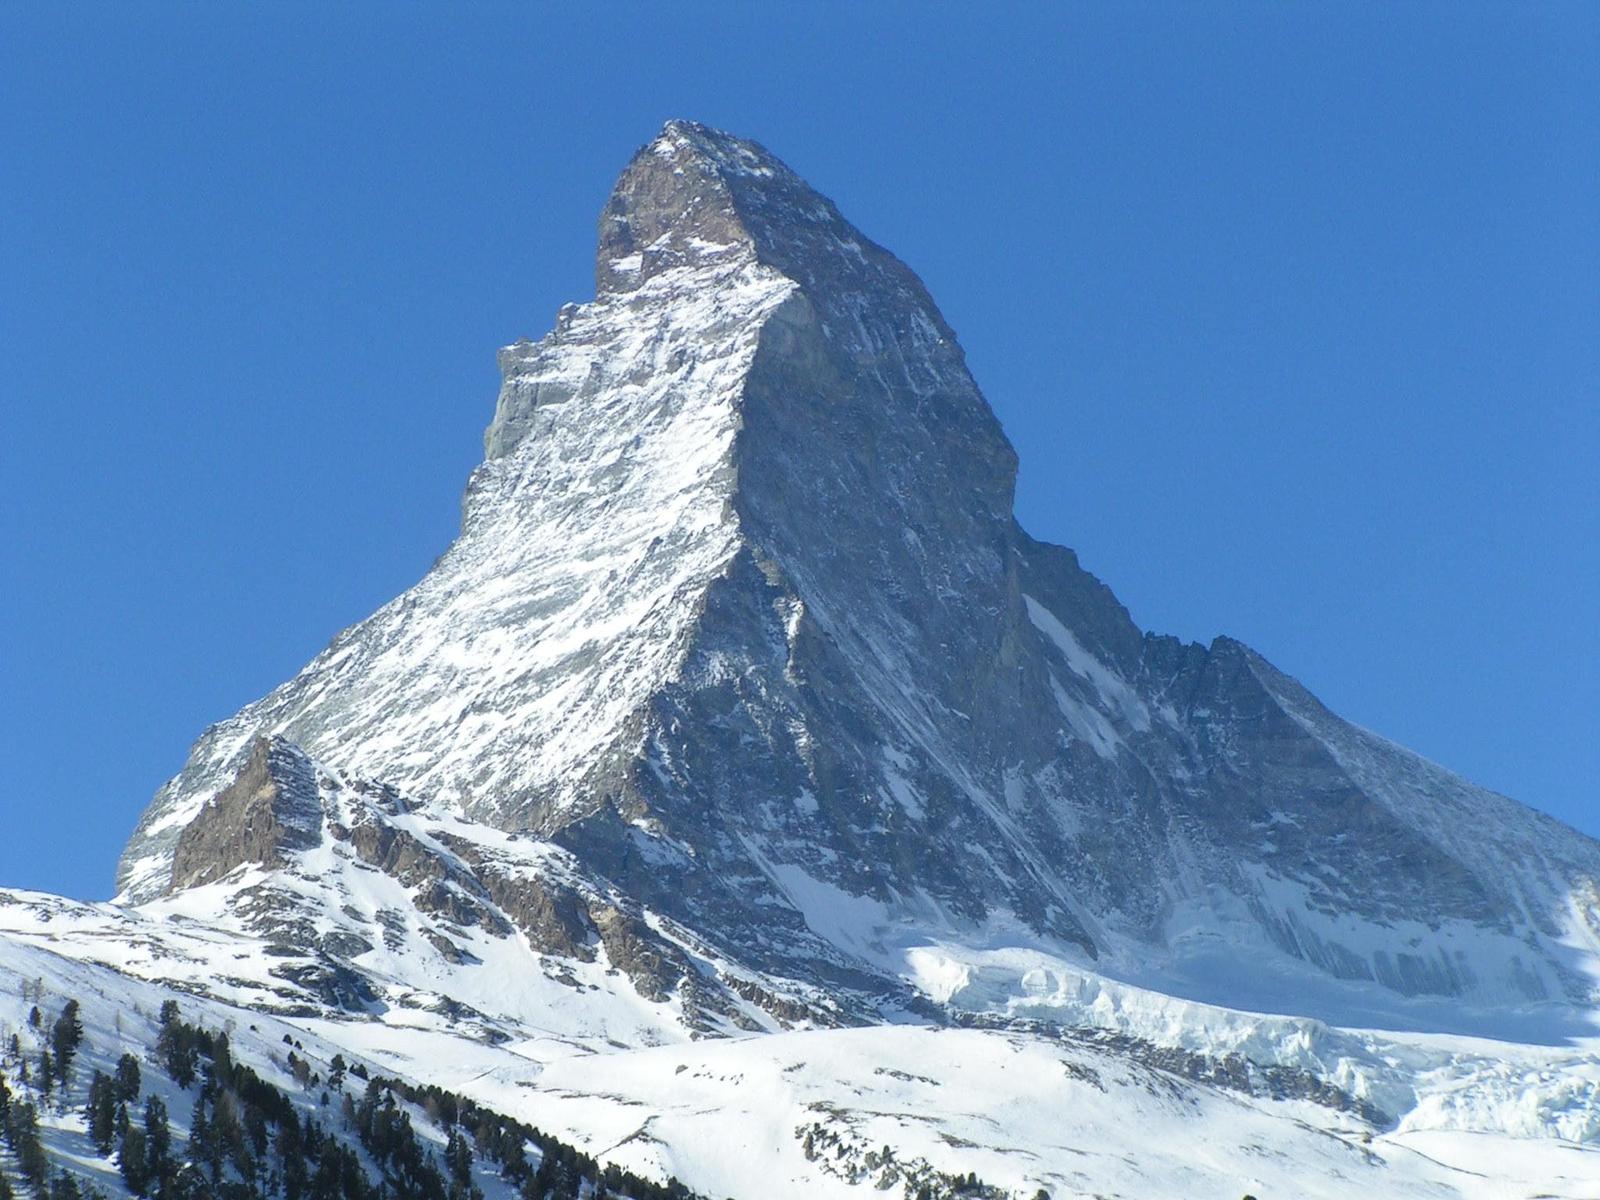 Can You Match These Natural Wonders to Their Locations? Matterhorn